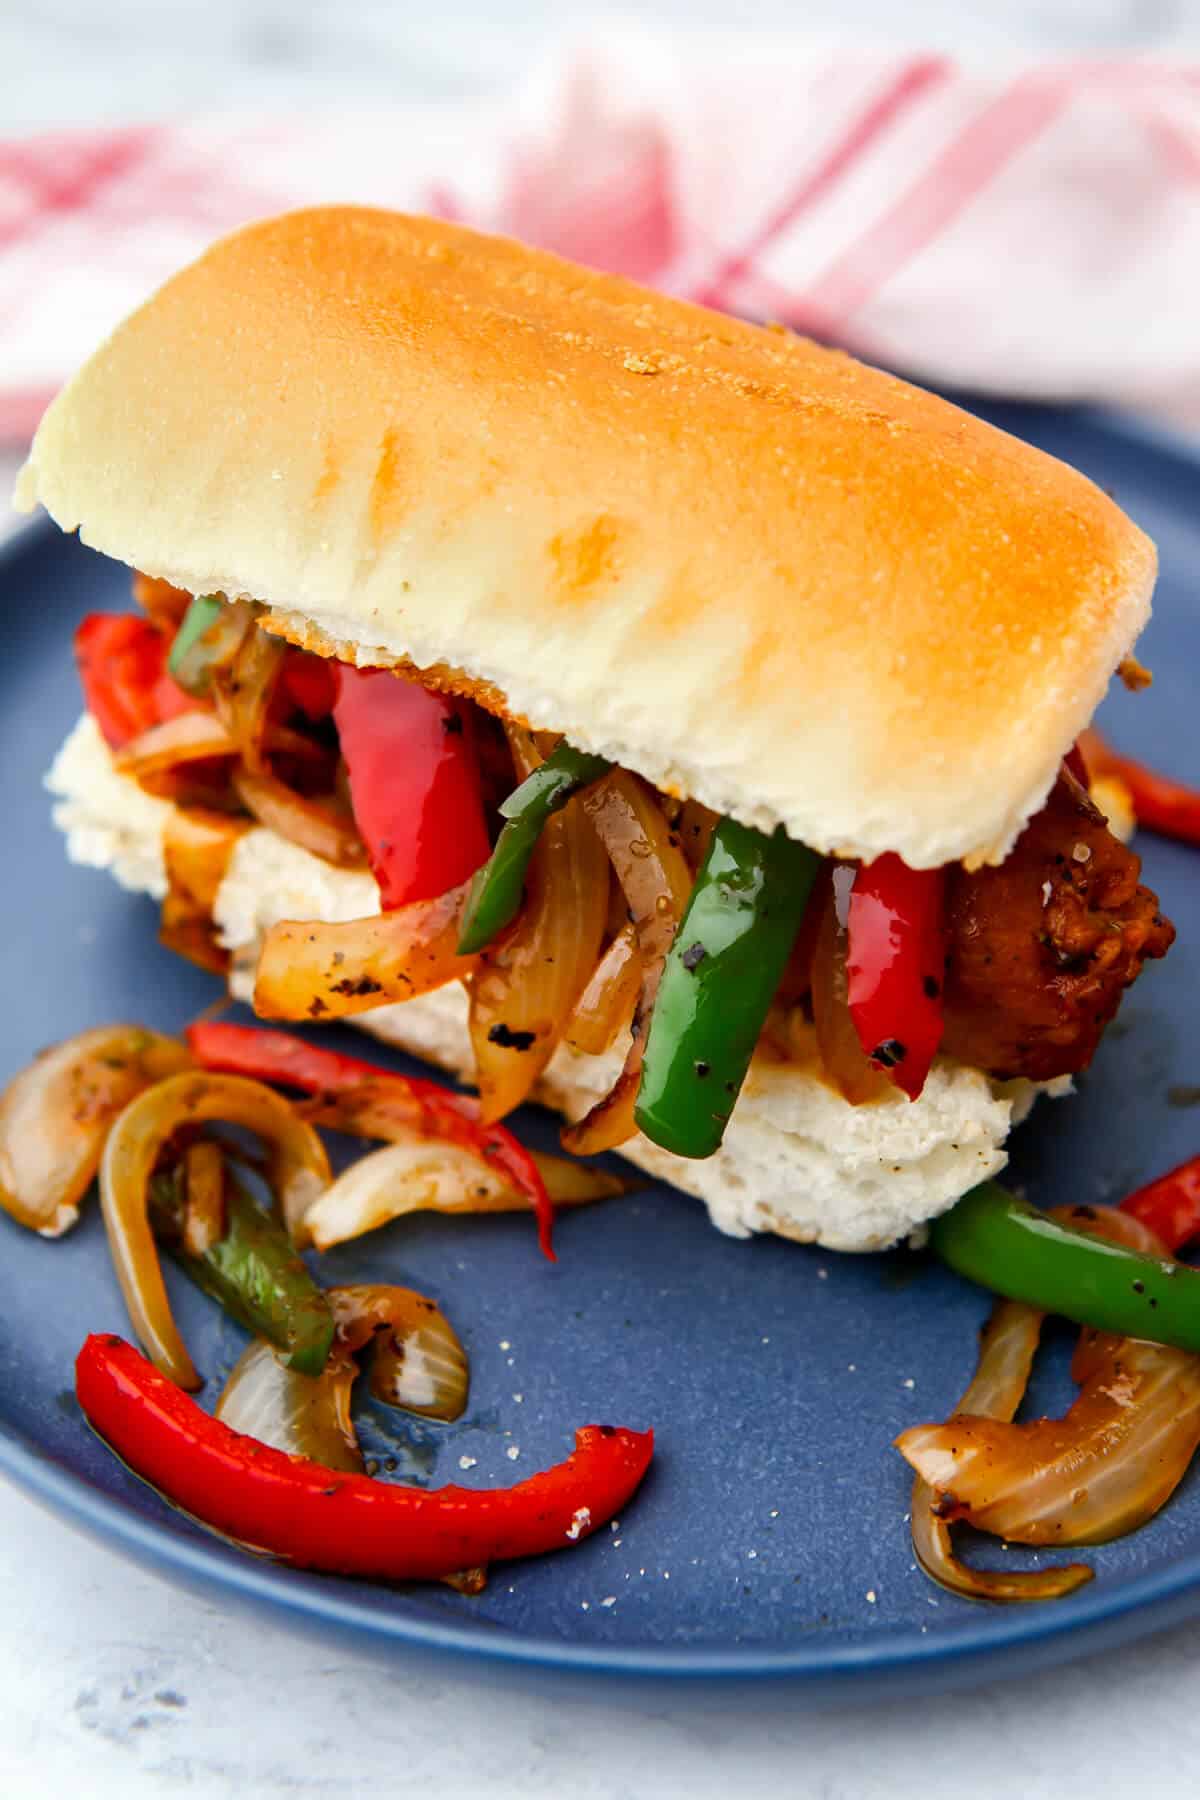 A vegan sausage and pepper sandwich on a blue plate.